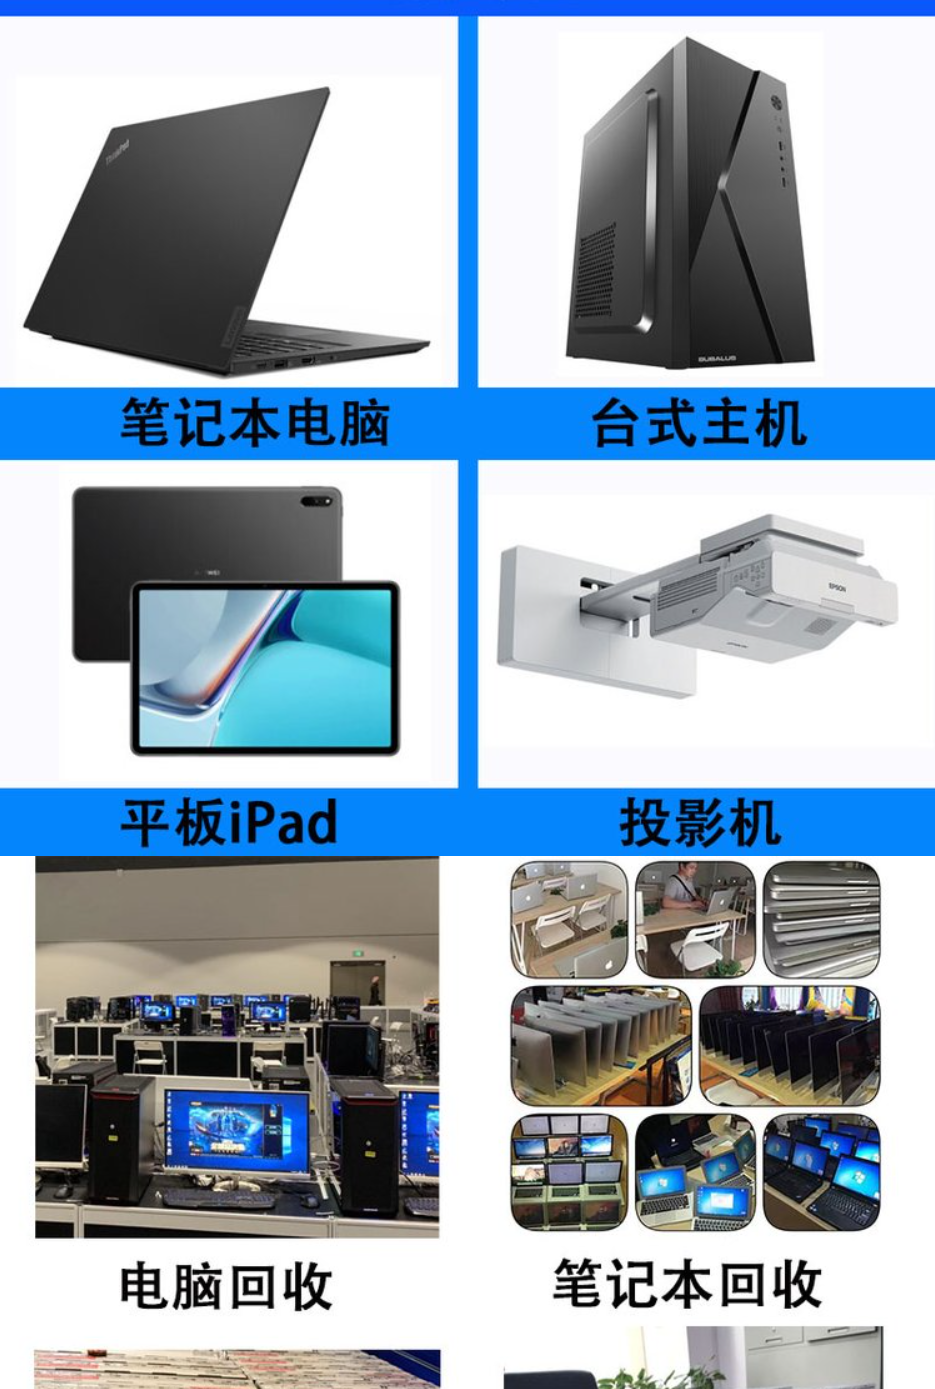 Computer rental, conference and exhibition laptop rental, second-hand all-in-one machine recycling, desktop wholesale